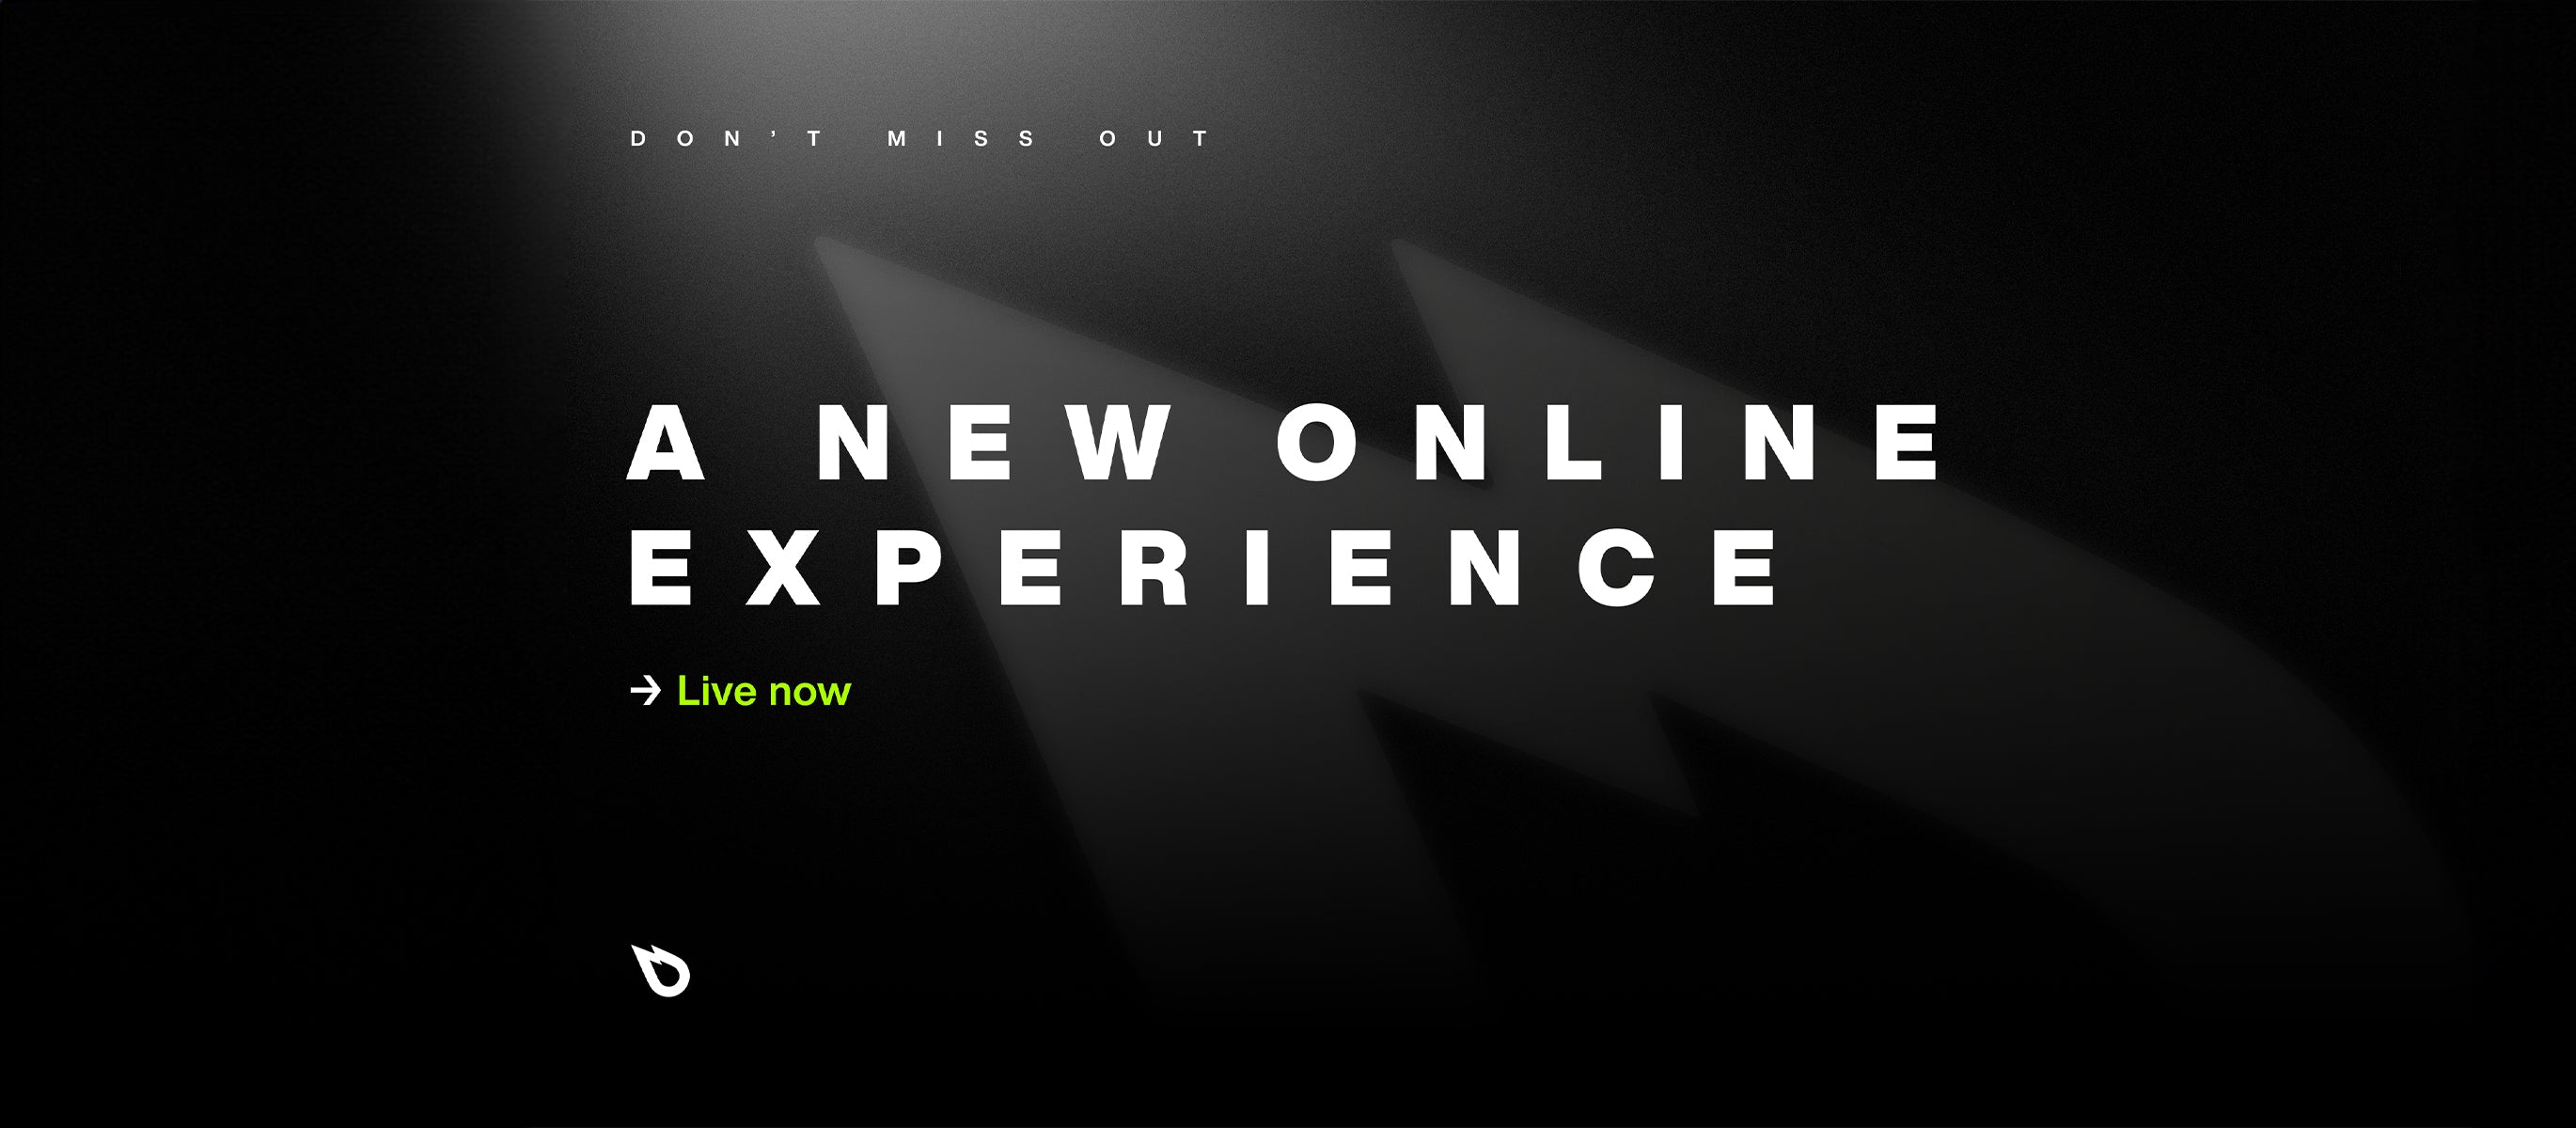 DON’T MISS OUT : NEW ONLINE EXPERIENCE